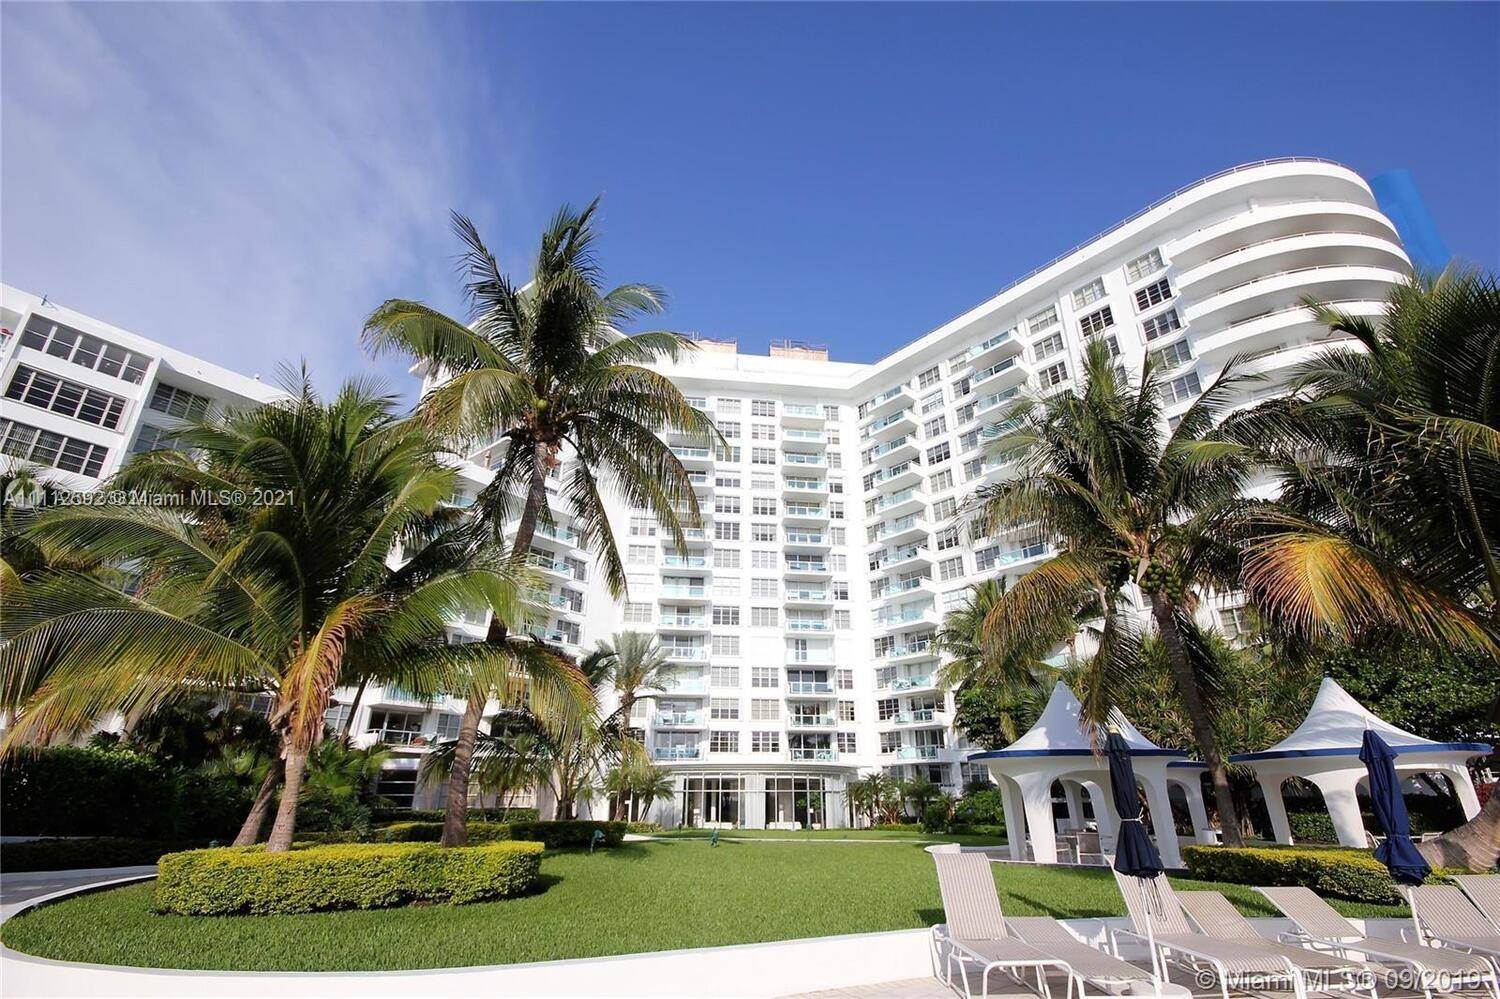 Seacoast Towers is a luxurious resort style oceanfront condominium on Millionaires Row designed by world famous architect of the Fontainebleau, Morris Lapidus.